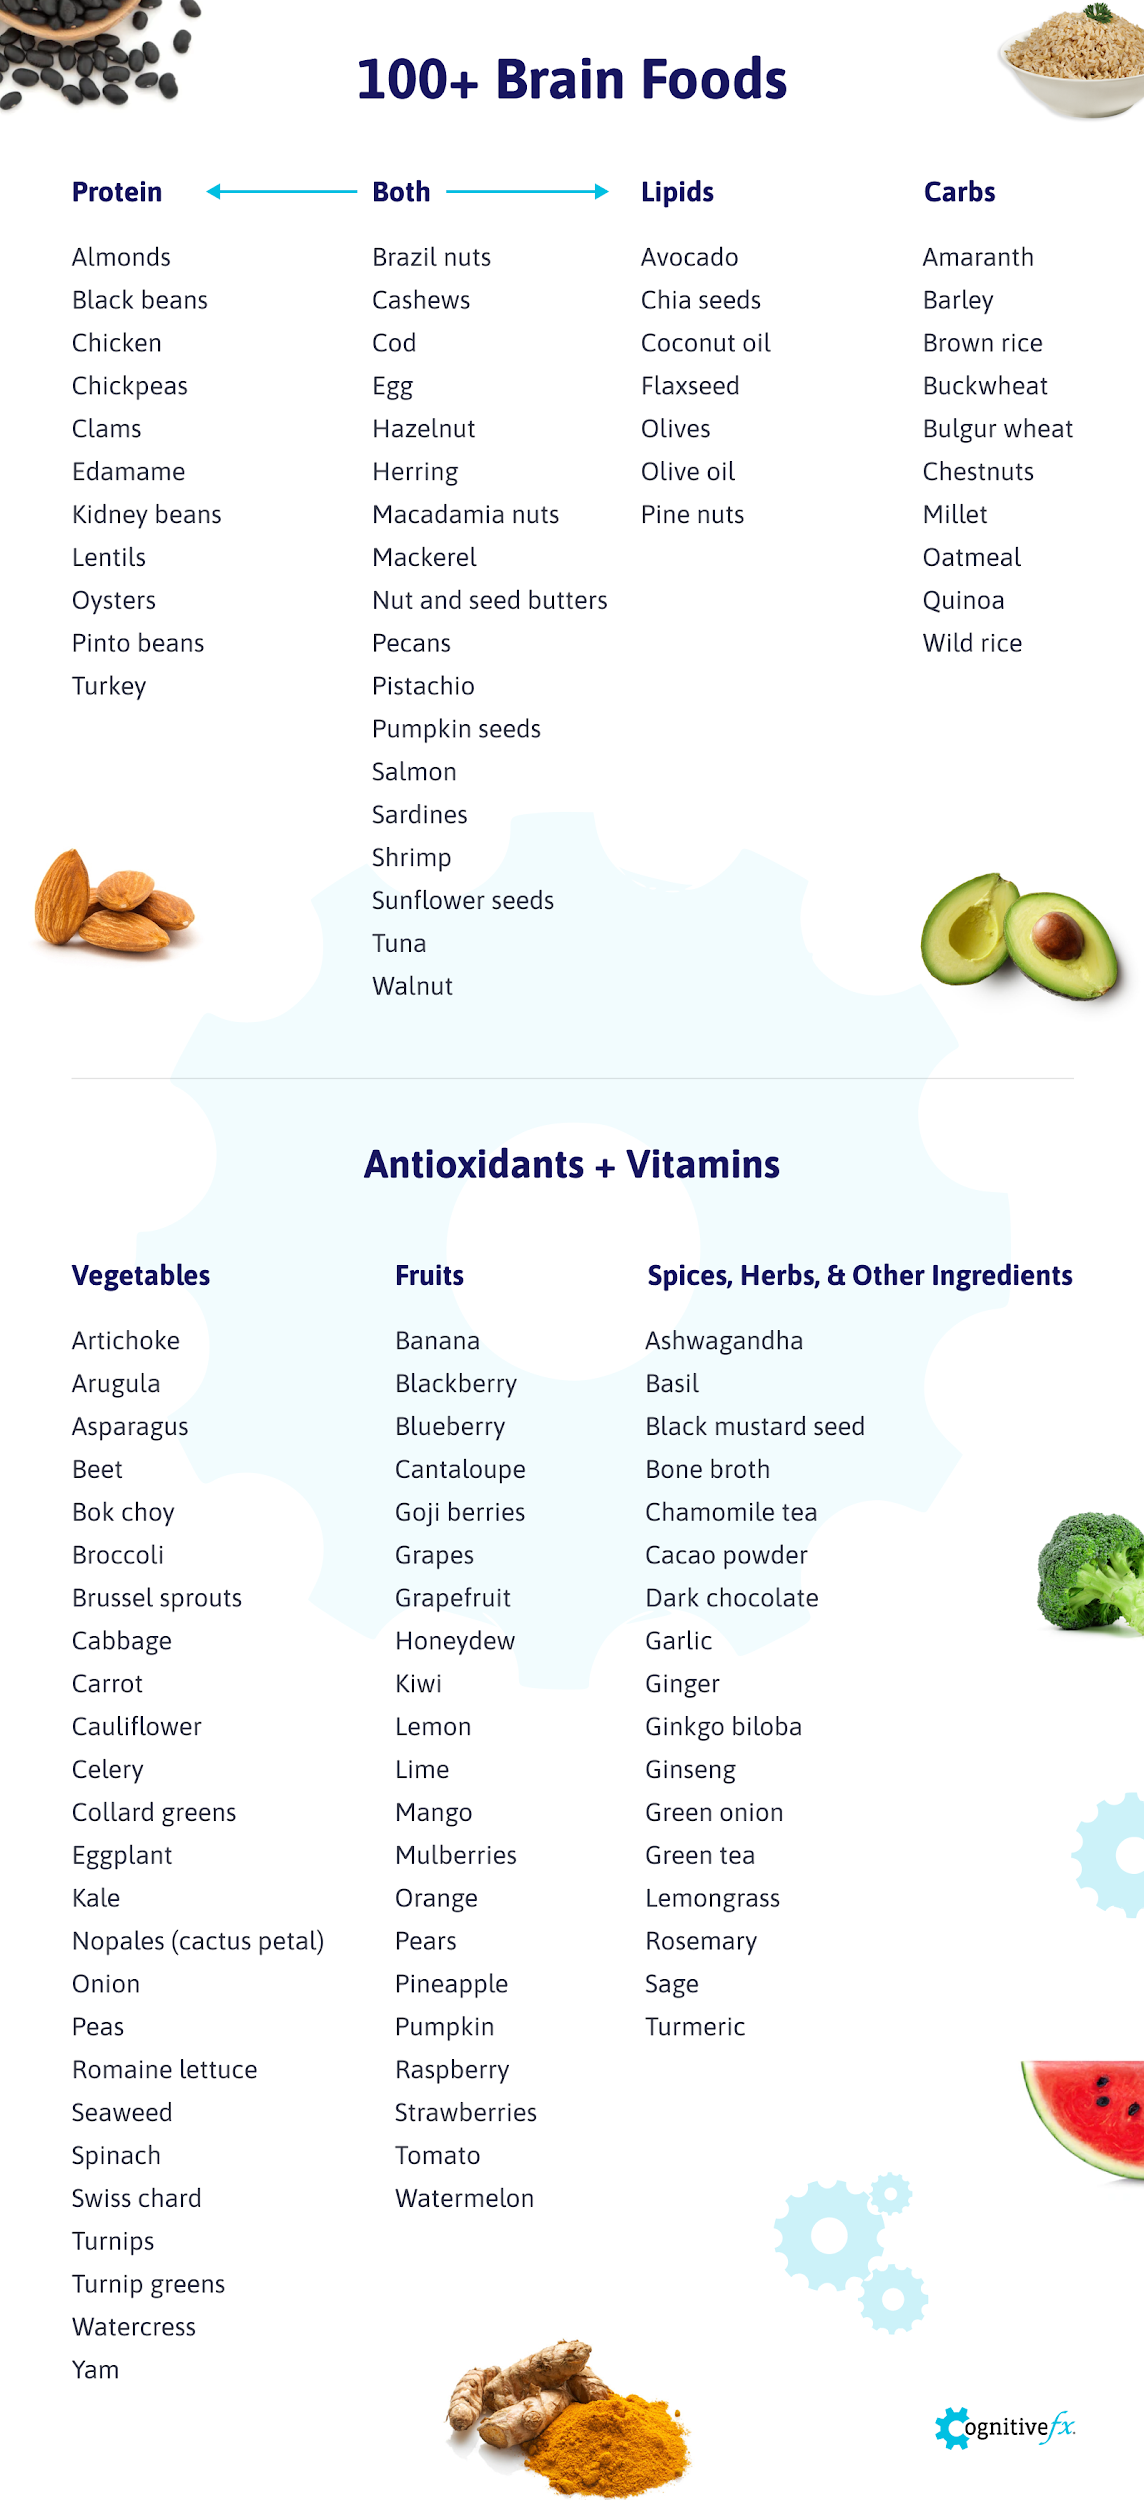 A list showing over 100 Brain Foods including proteins, lipids, carbs, antioxidants, and vitamins.